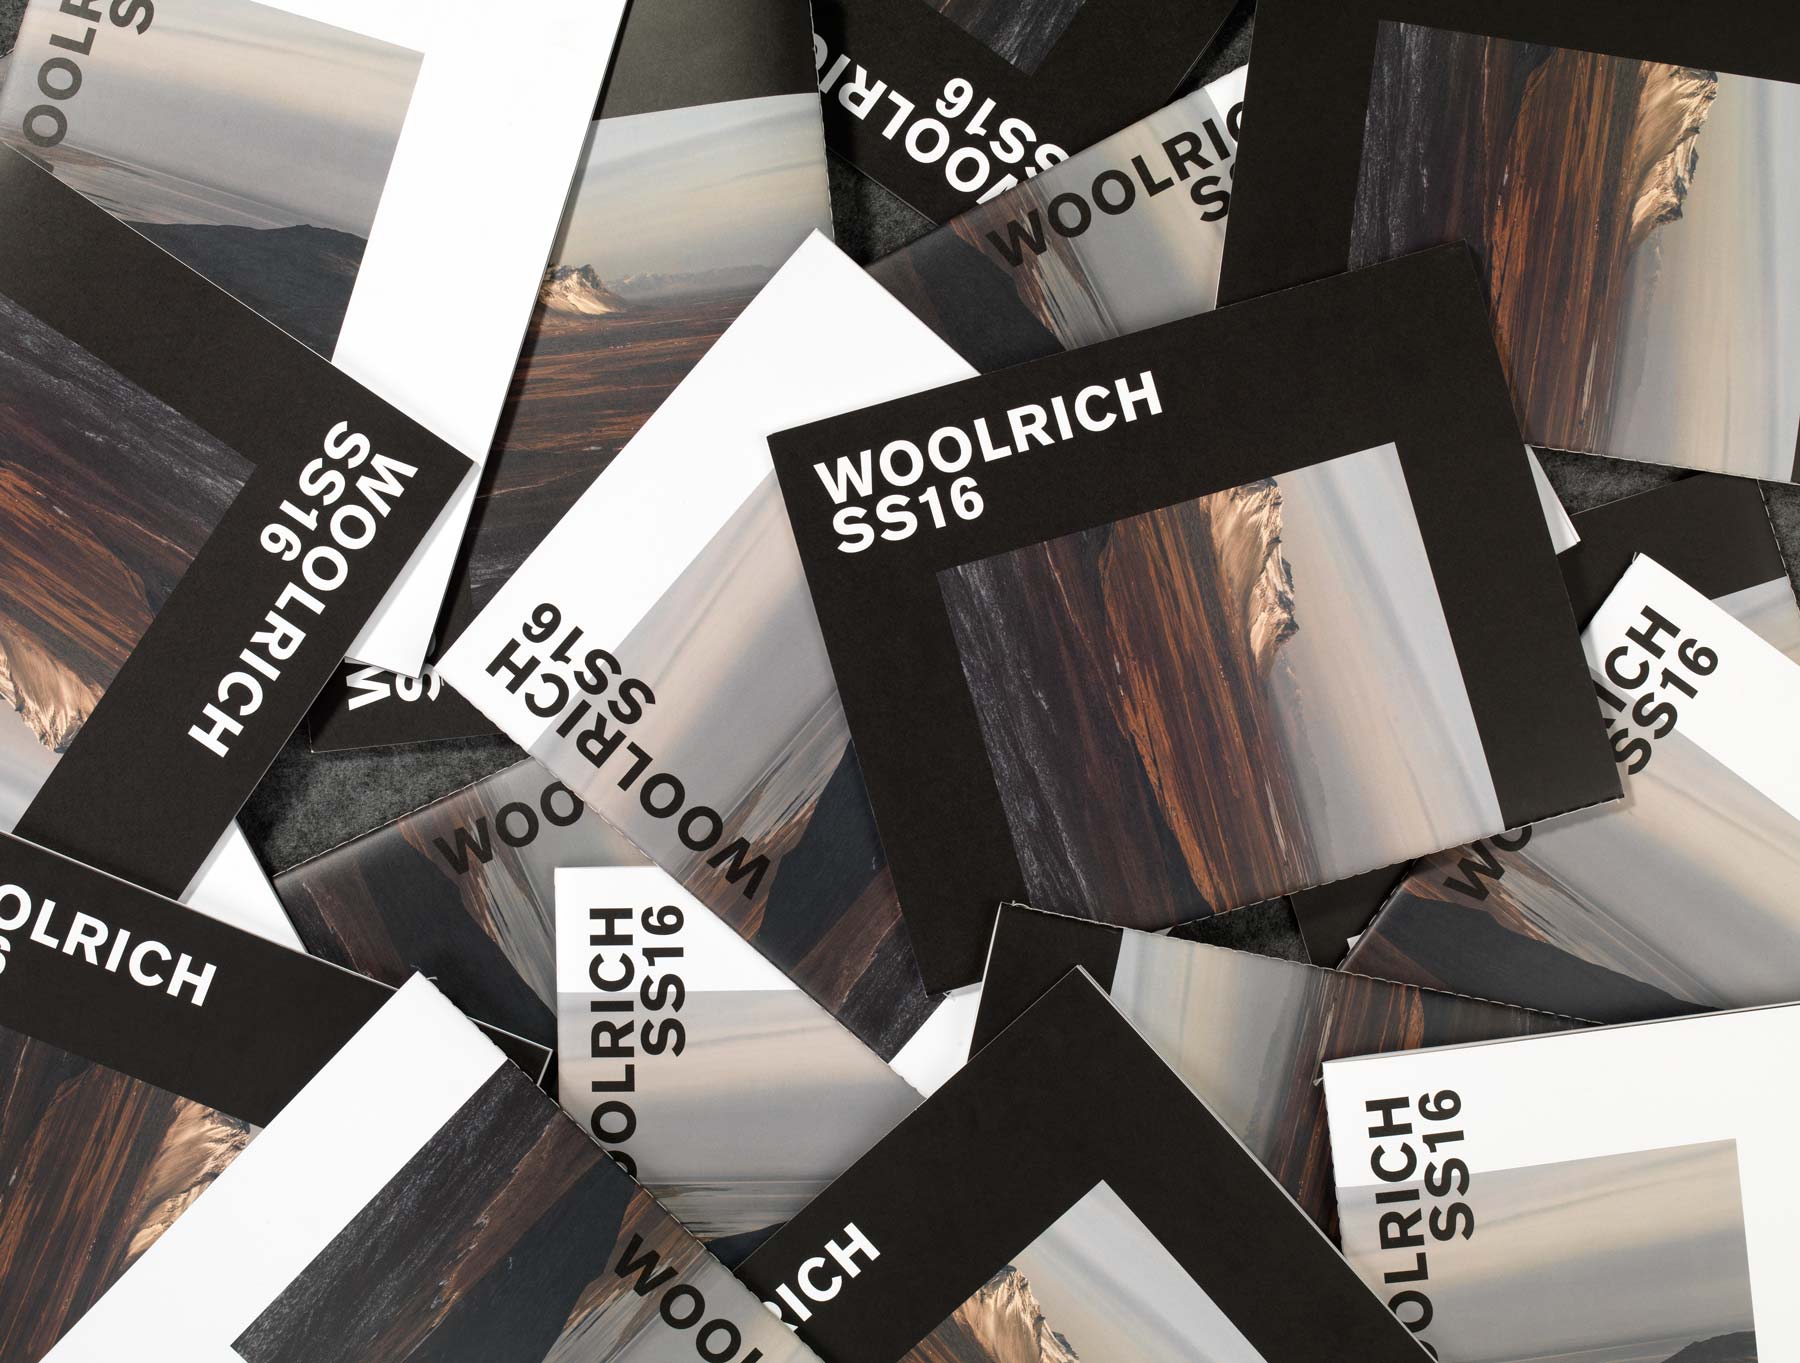 Woolrich SS16: White Label - Public-Library